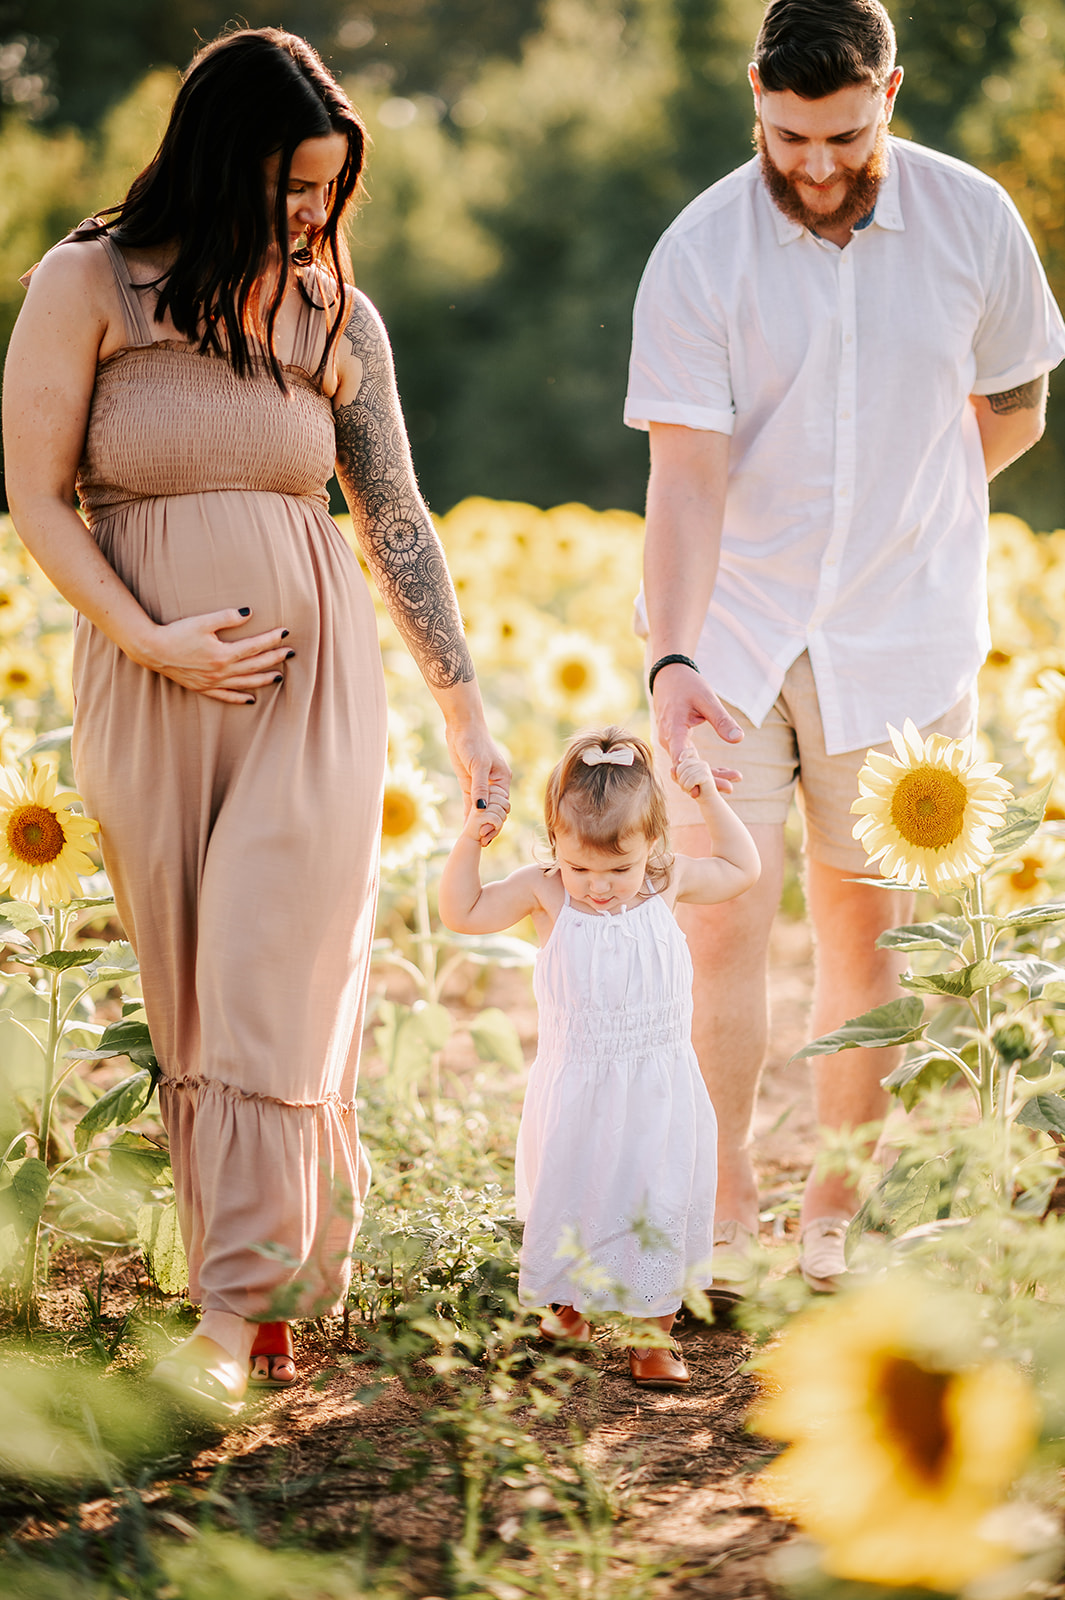 A pregnant mom and dad lead their toddler daughter in a white dress through a field of sunflowers at Dogwood Farms